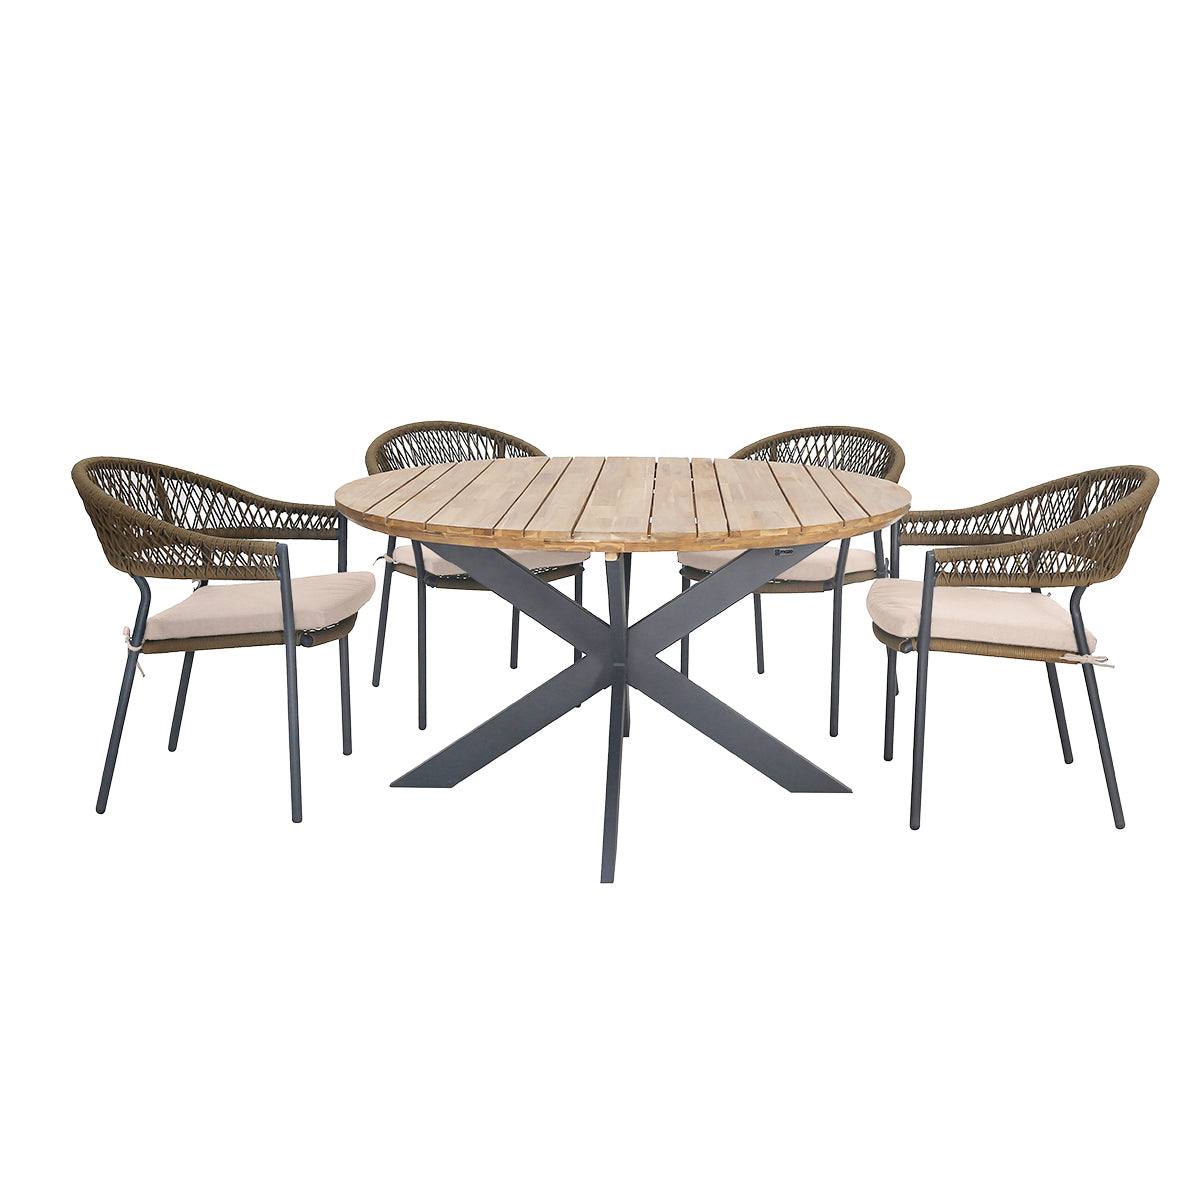 Maze Outdoor Bali Rope Weave Round Dining Set In Beige 4 Seater